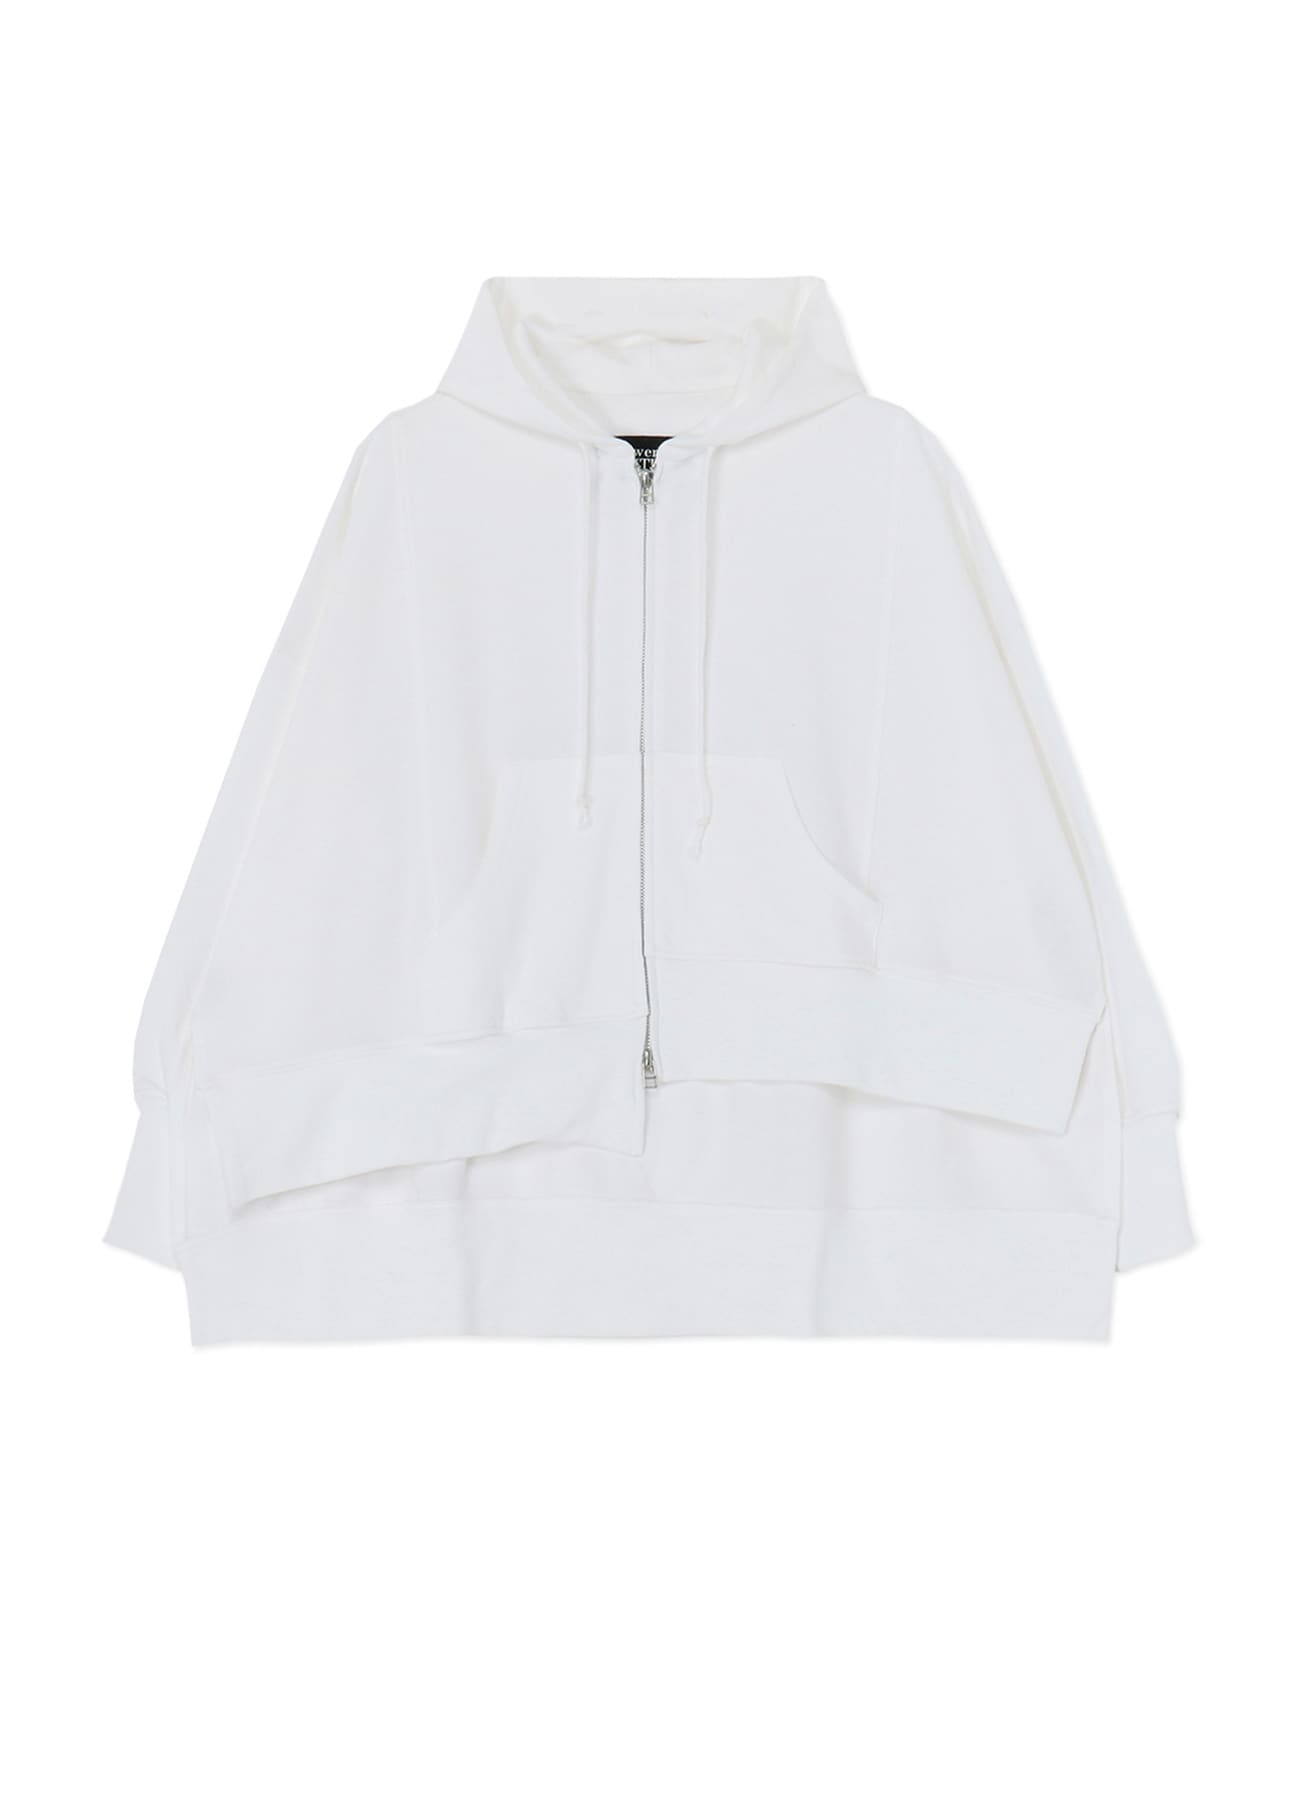 ASYMMETRIC ZIP-UP HOODIE(S White): power of the WHITE shirt｜THE 